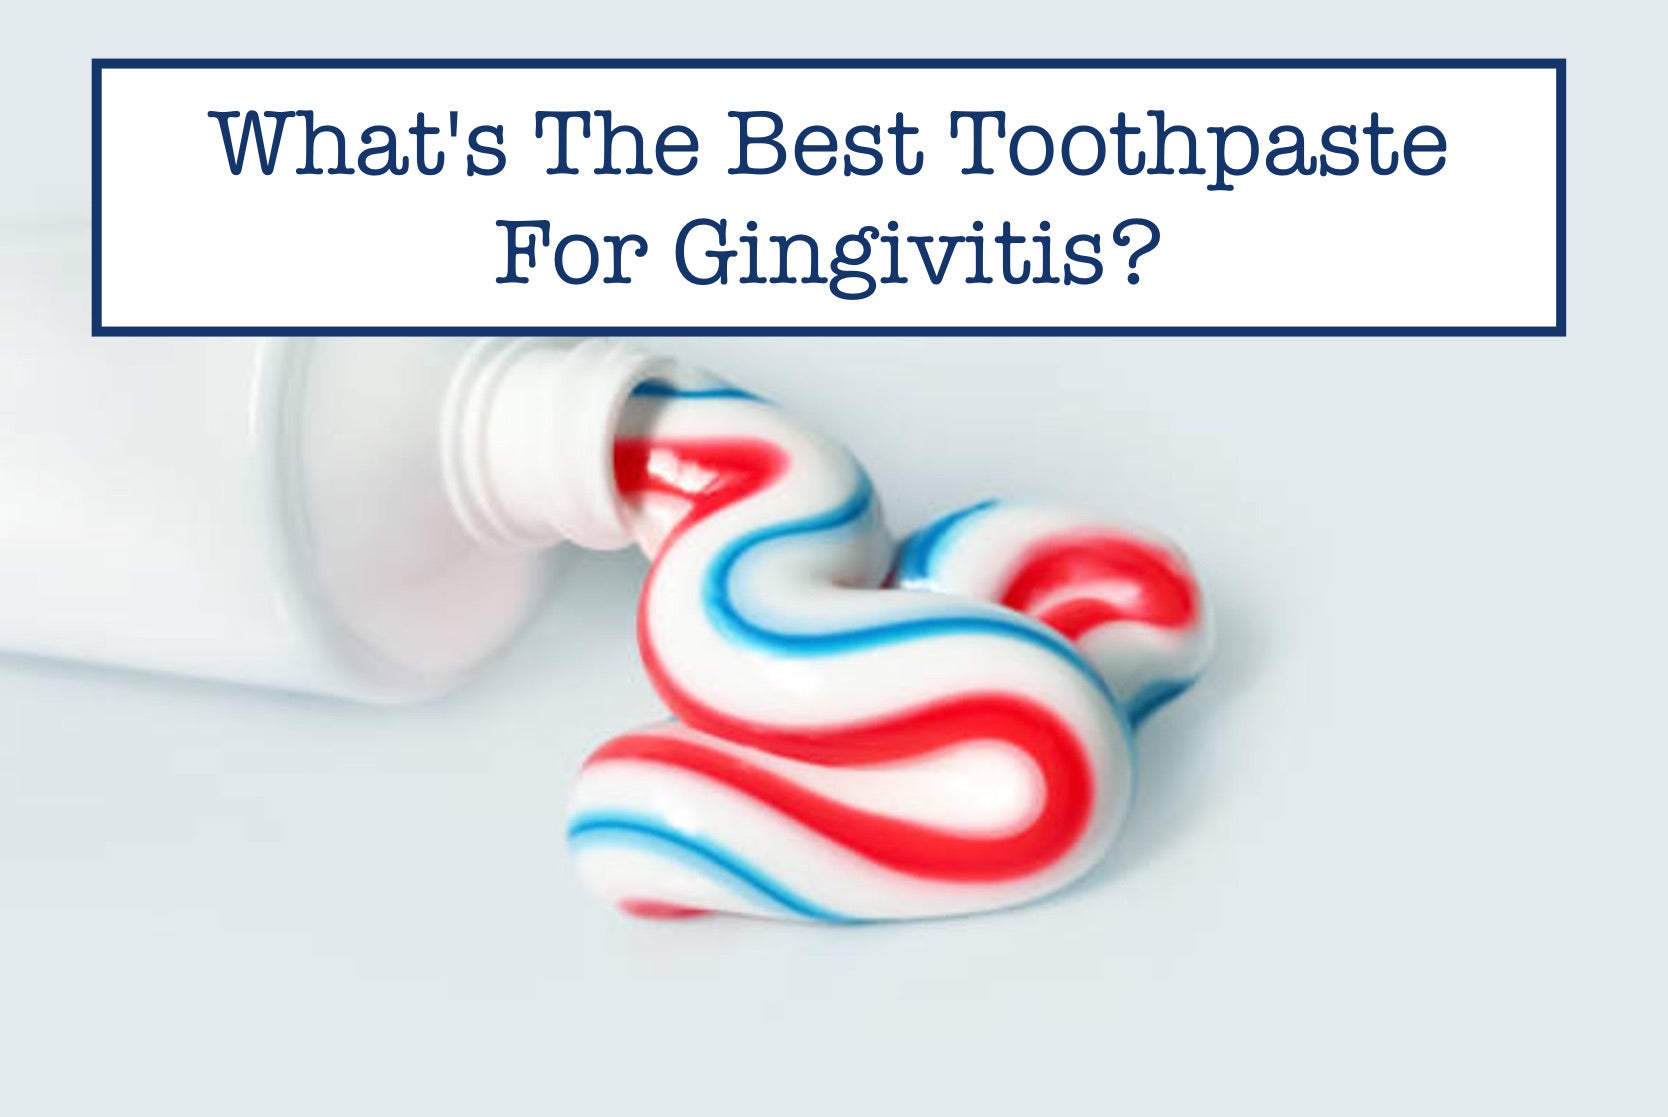 What's The Best Toothpaste For Gingivitis?